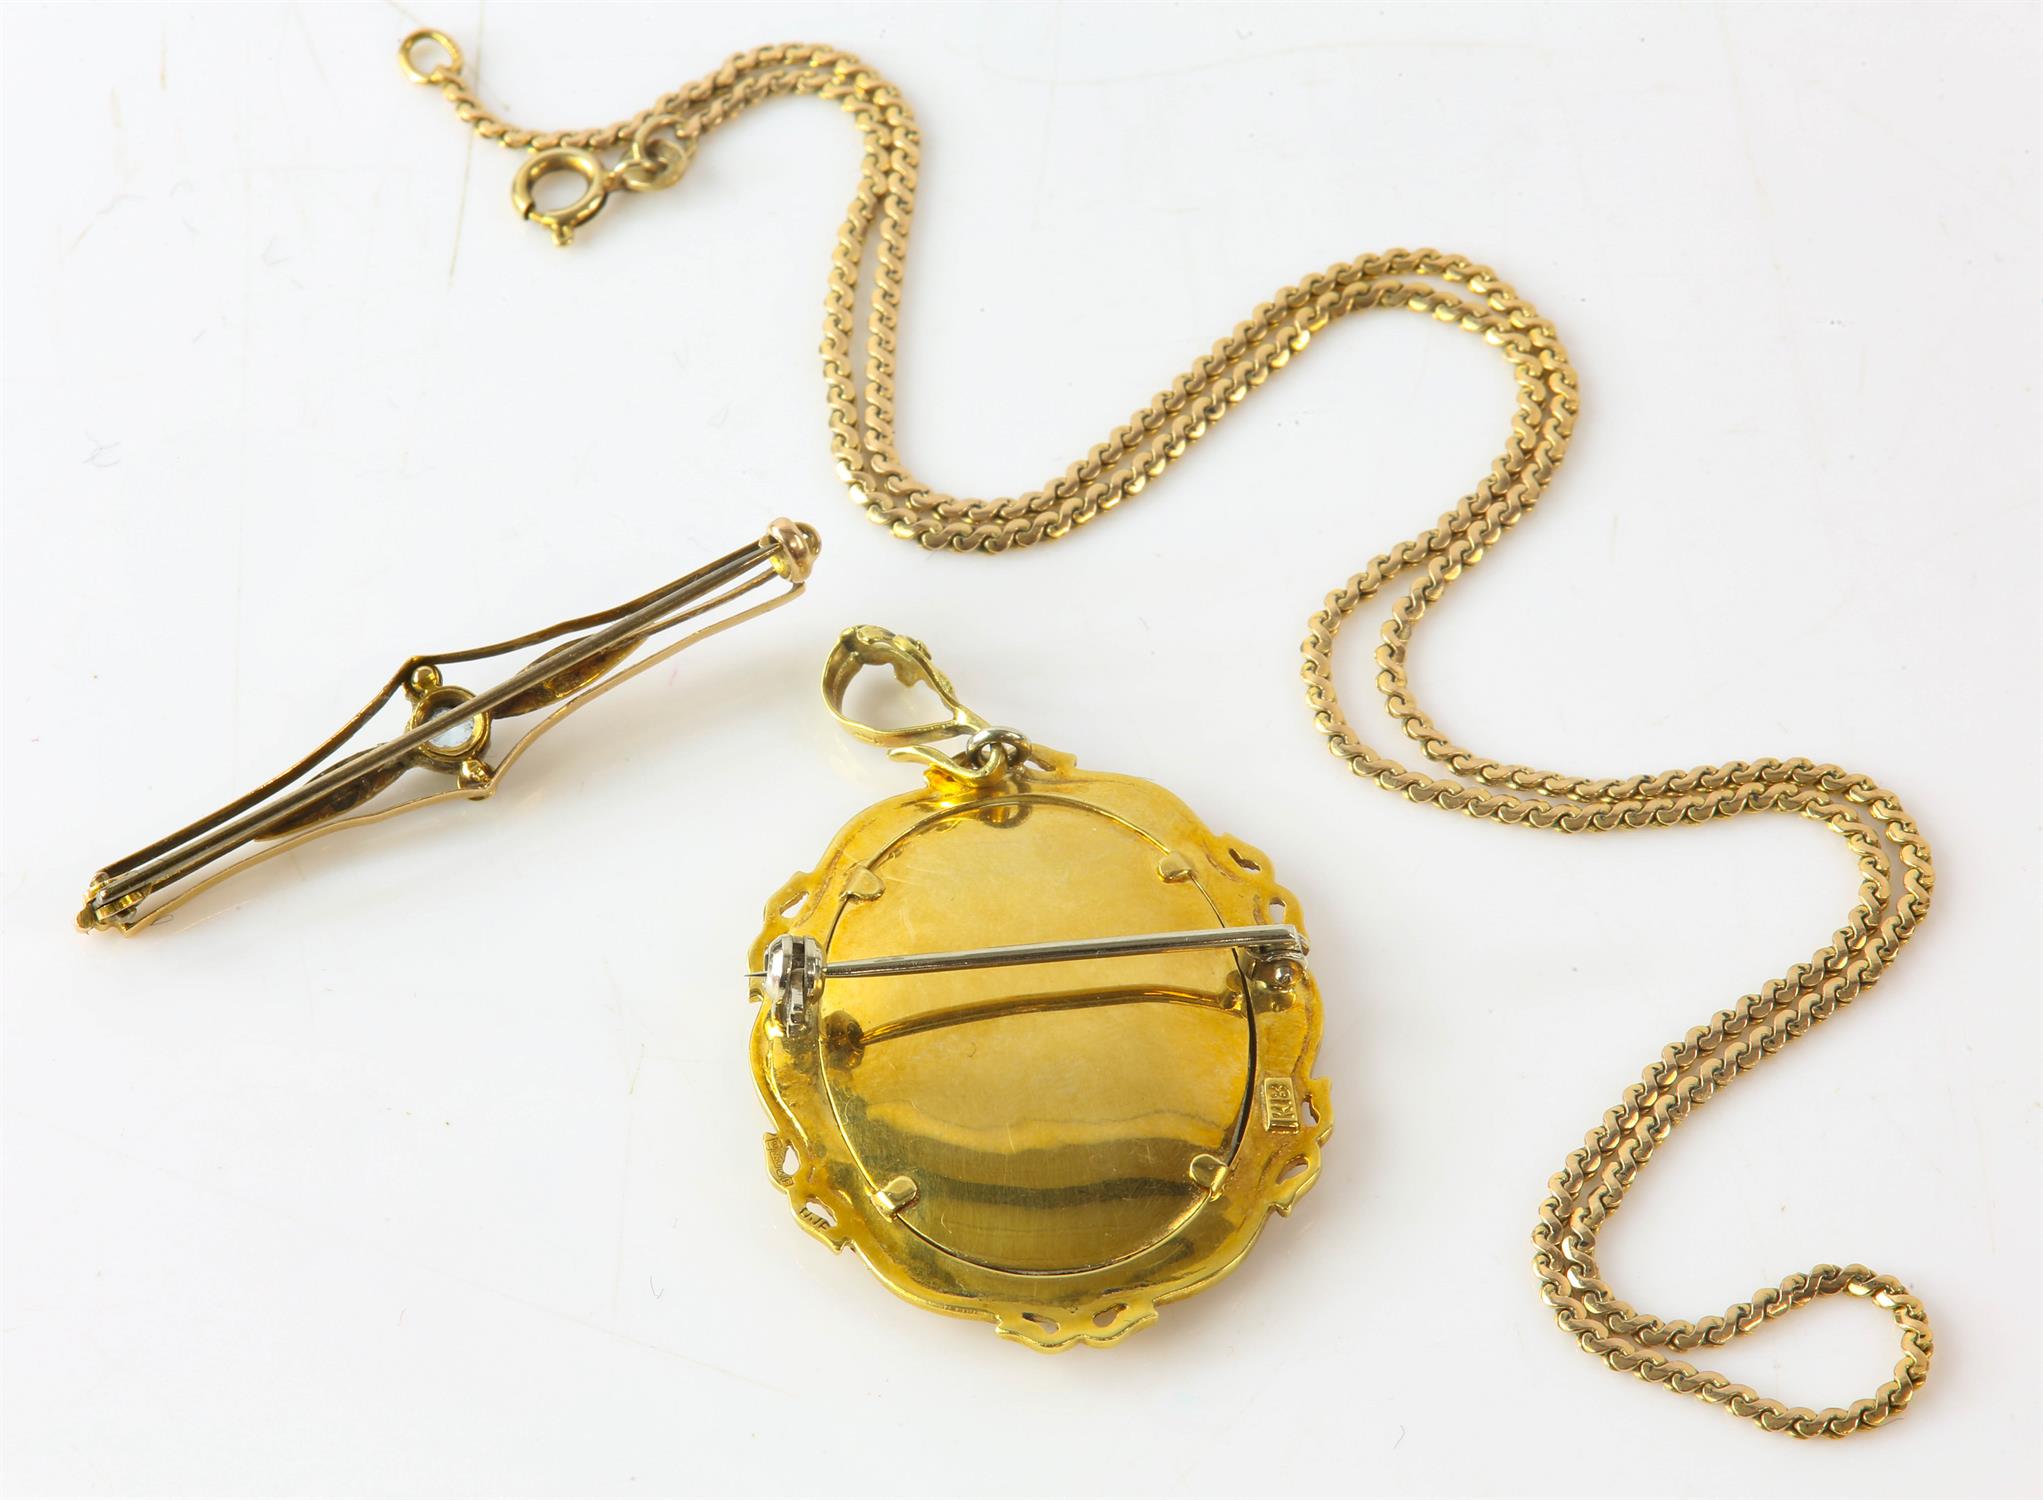 A stamped 18ct yellow gold brooch locket with an portrait of a woman wearing diamond jewellery, - Image 2 of 2